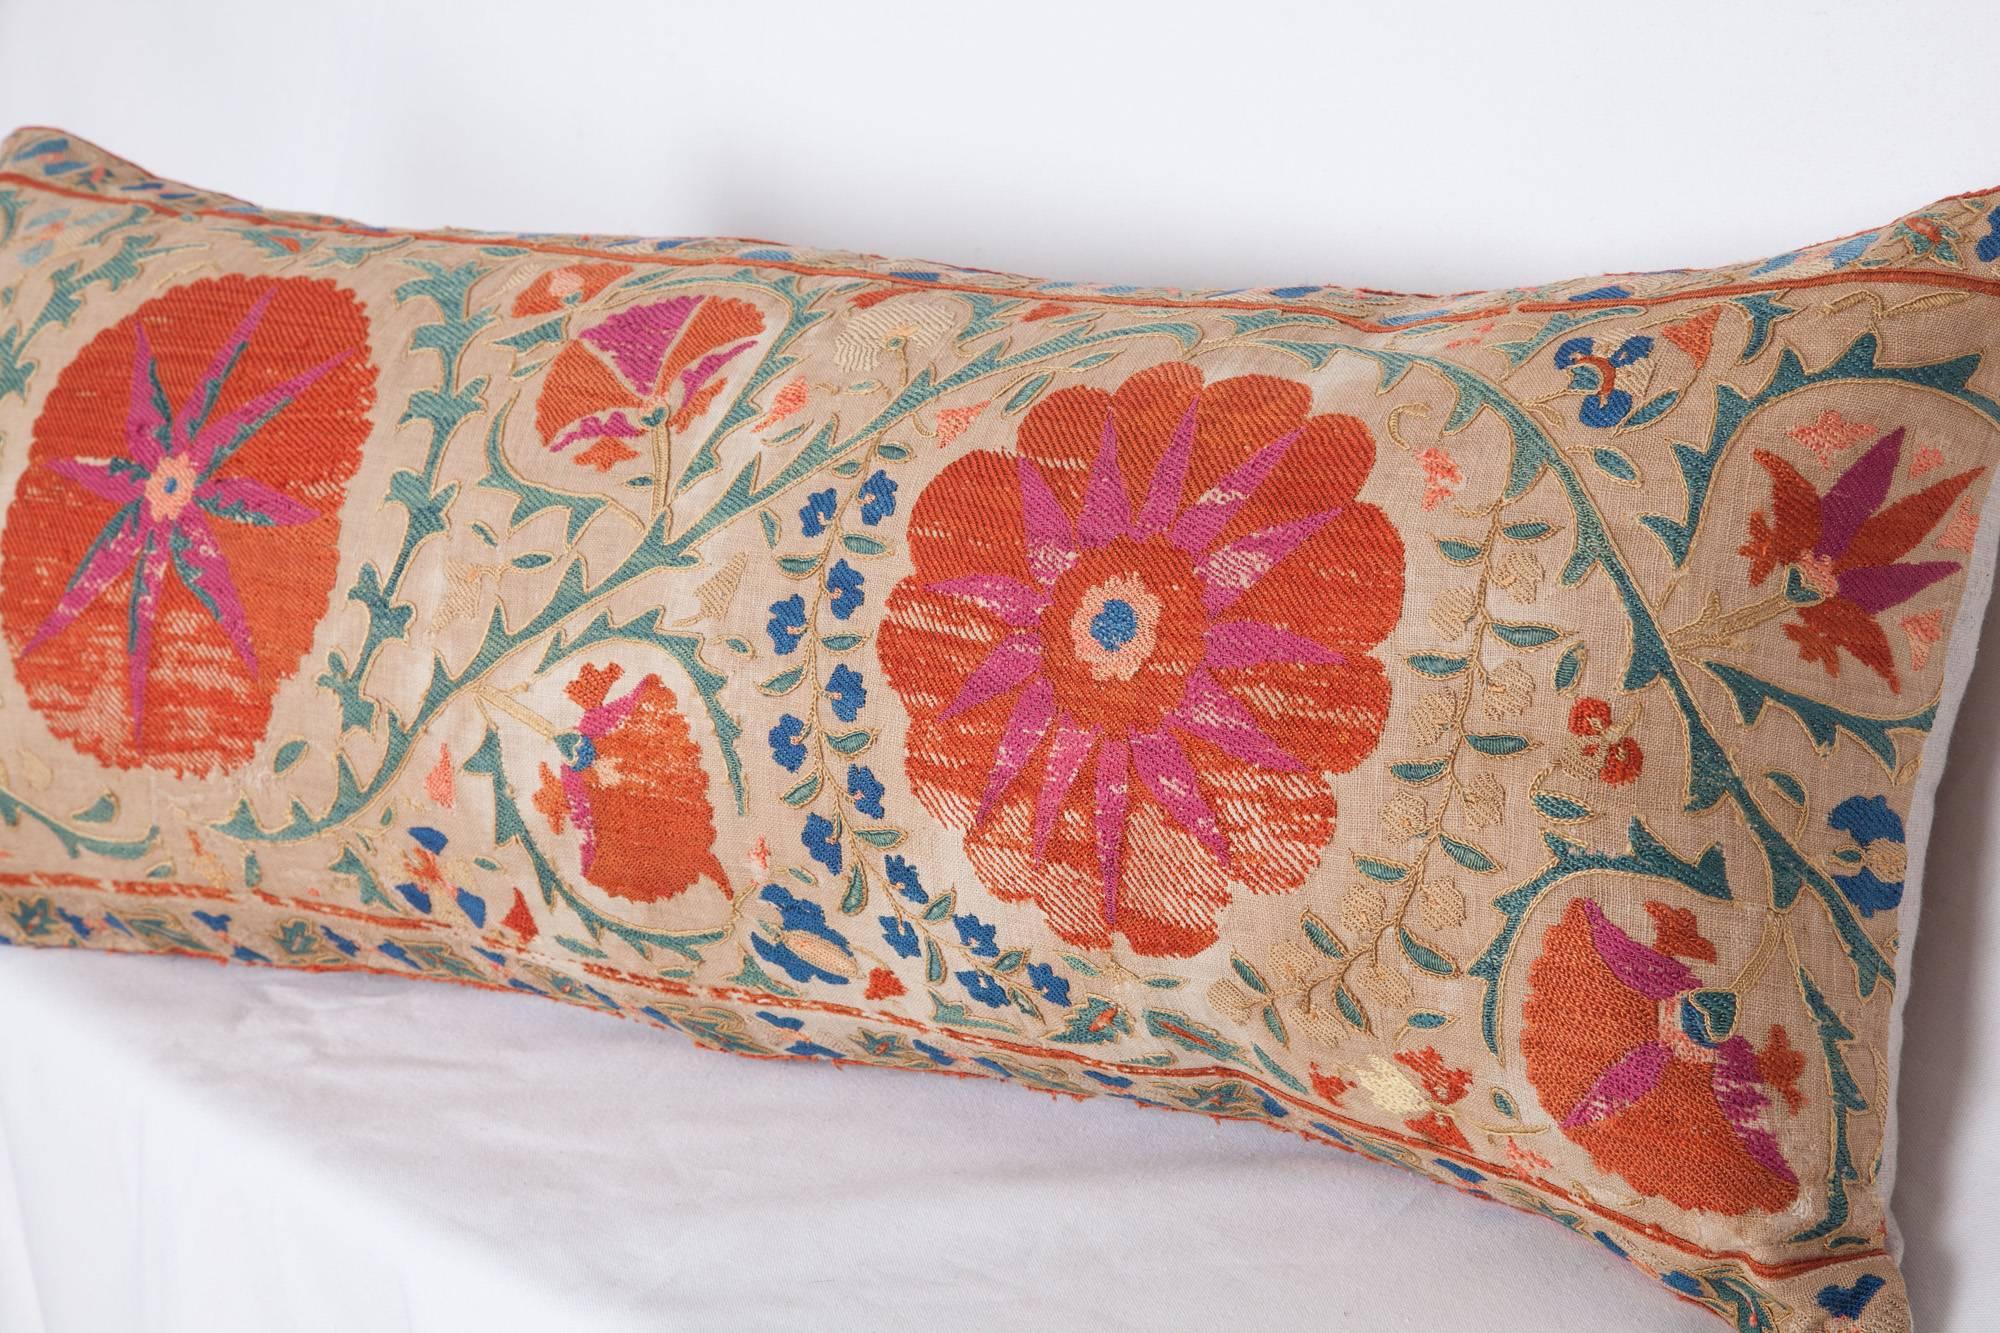 Antique Pillow Made Out of a Mid-19th Century, Uzbek Bukhara Suzani 4